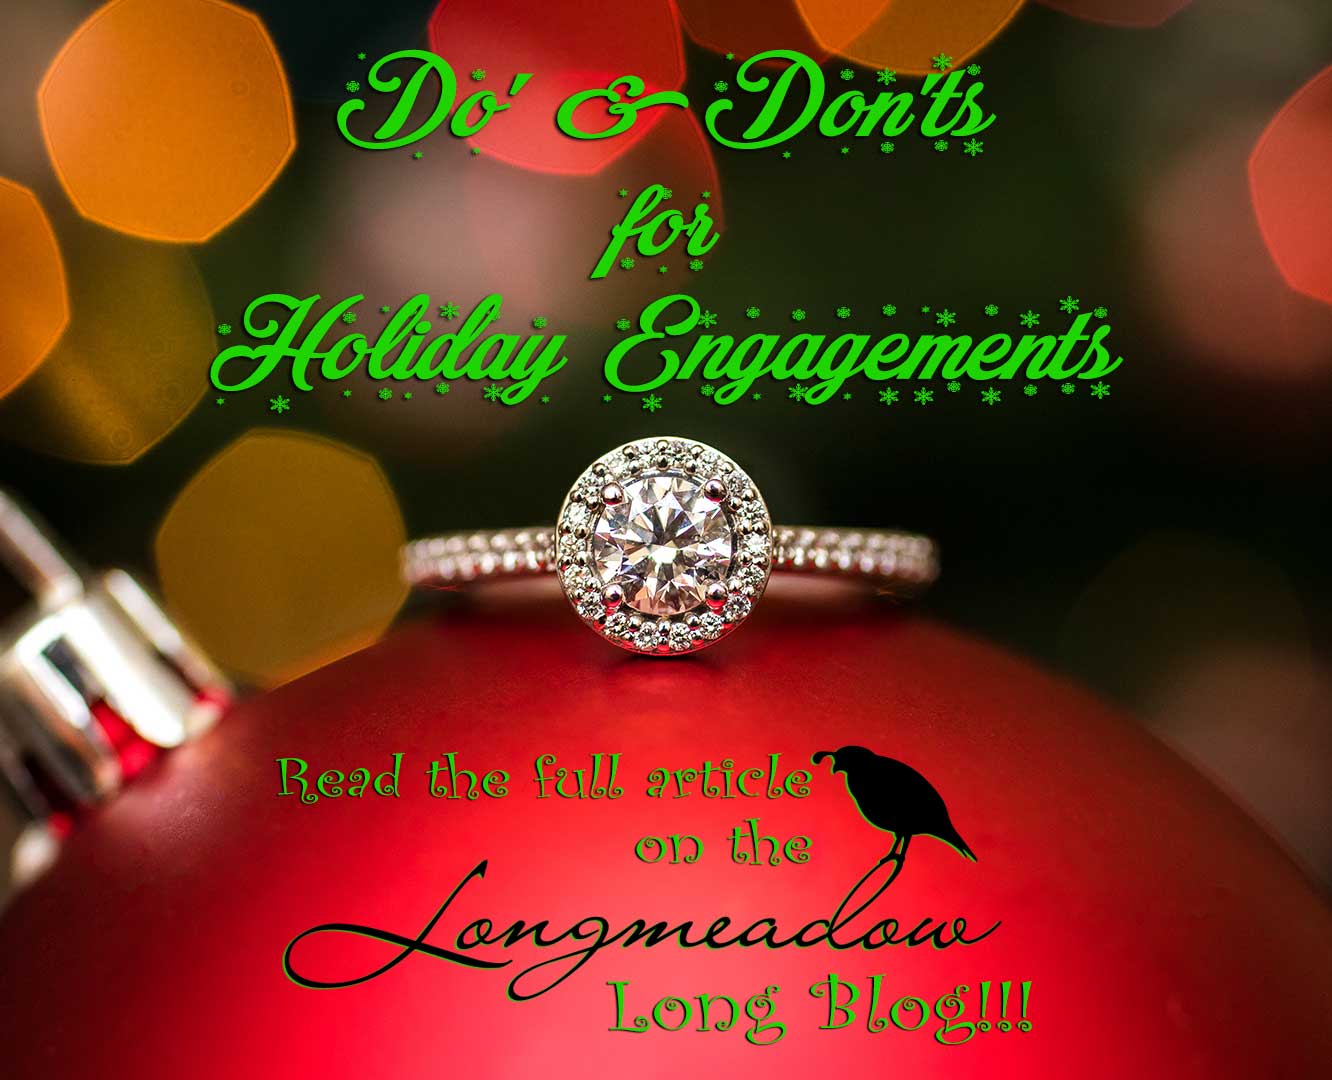 Do’s and Don’ts for Holiday Engagements